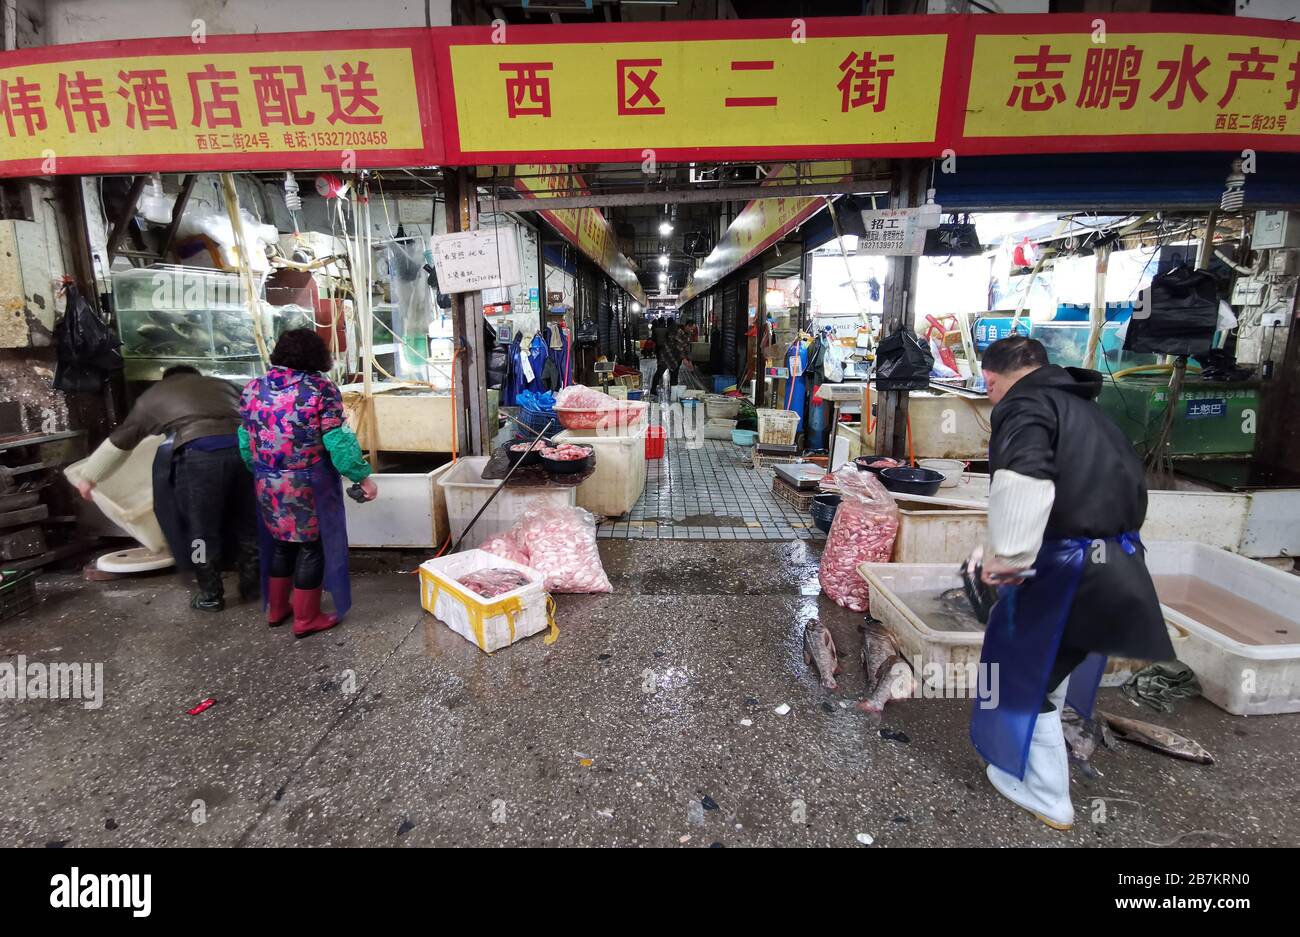 View of Wuhan Huanan Wholesale Seafood Market before its closure in Hankou, Wuhan city, central China's Hubei province, 31 December 2019. Stock Photo